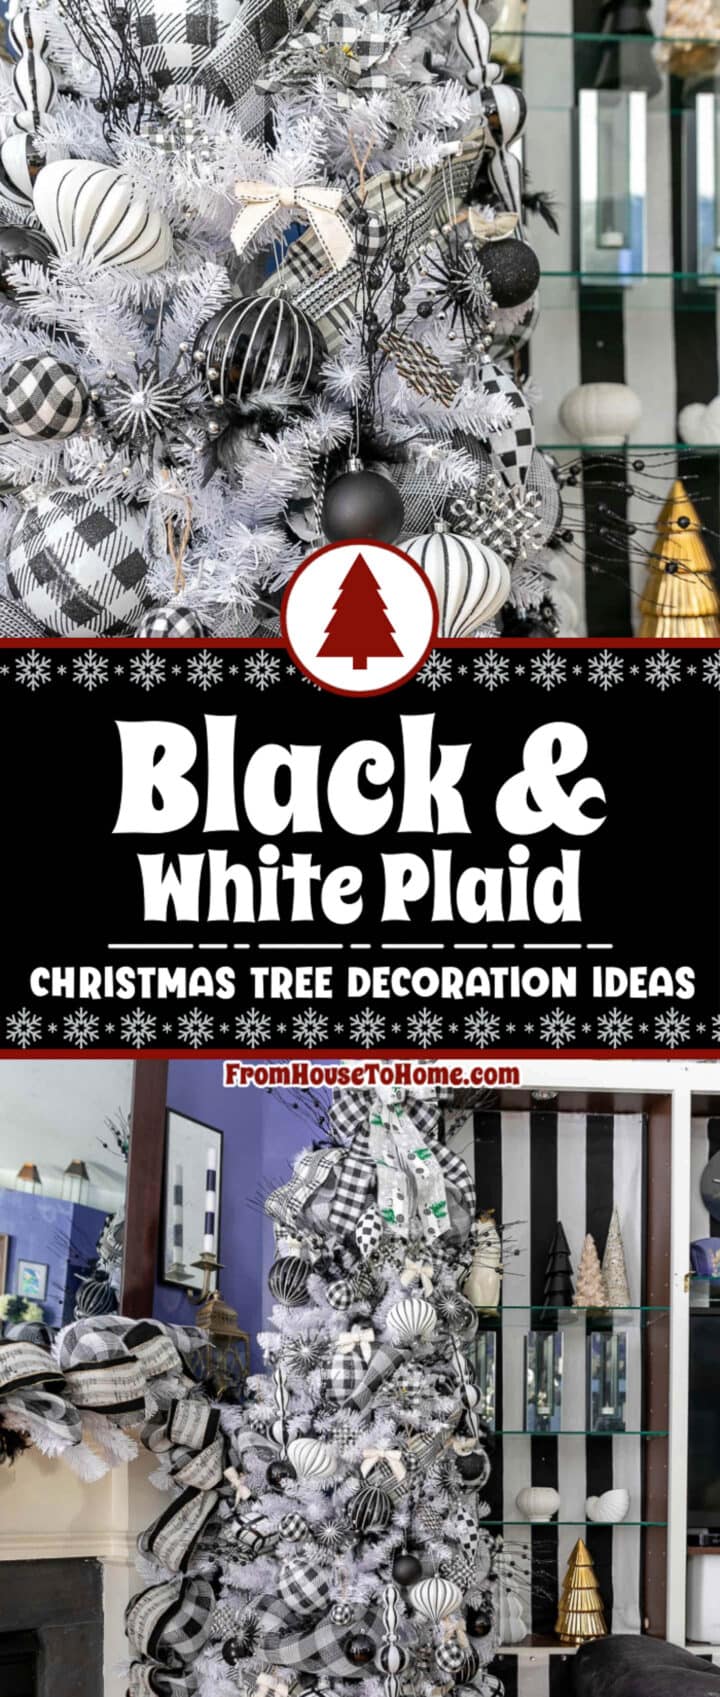 Plaid-inspired Christmas tree decor in classic black and white.